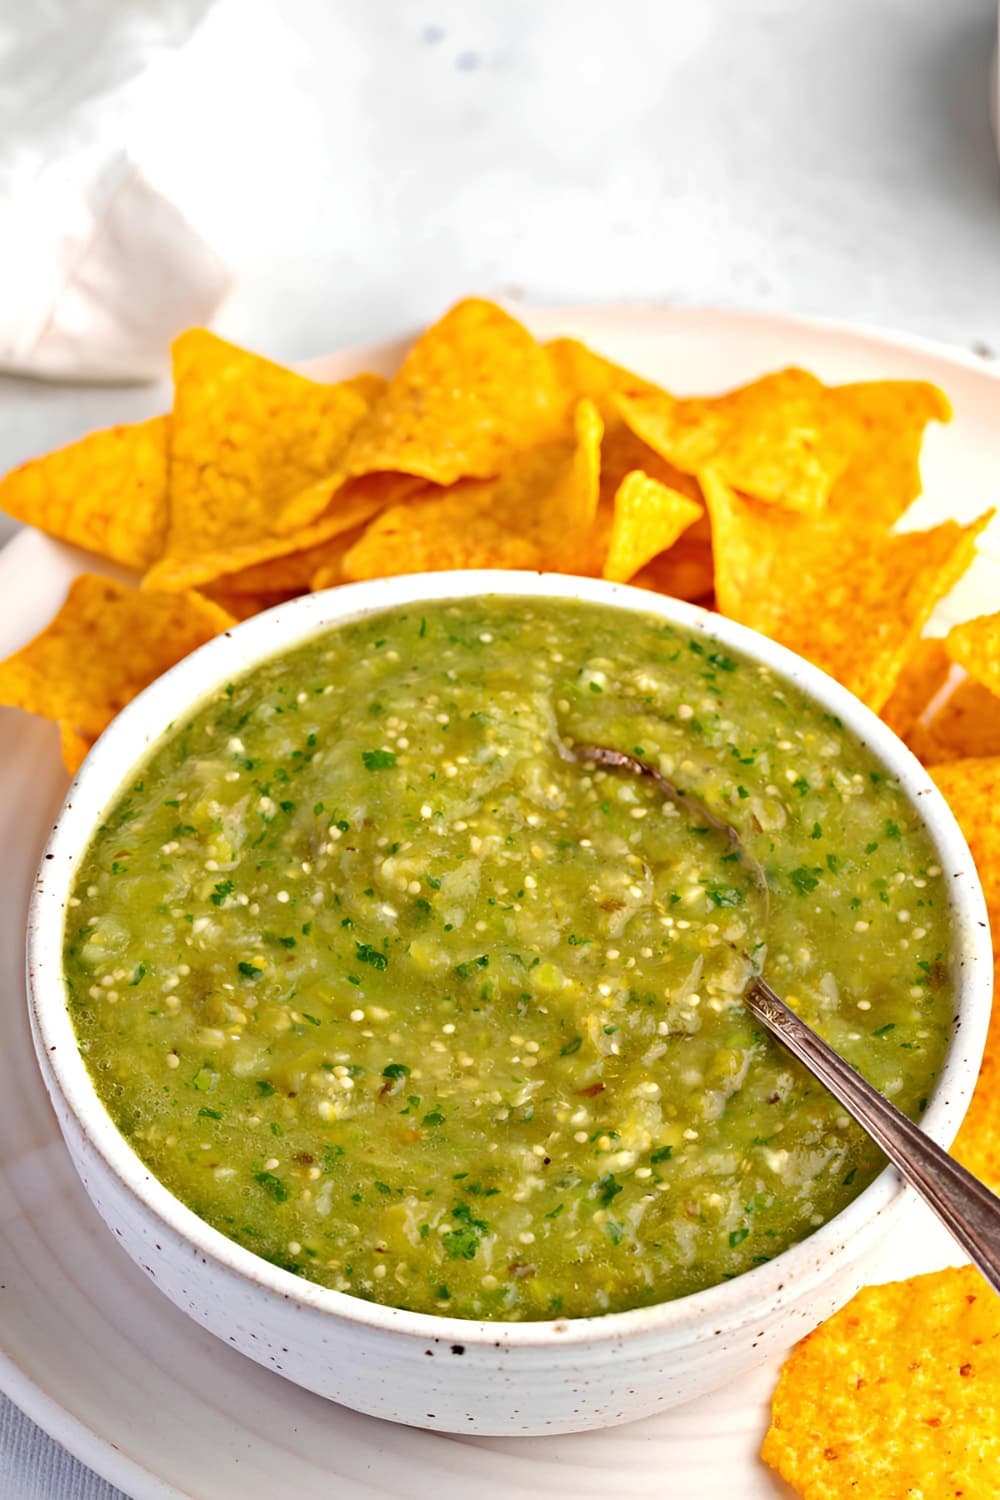 Bowl of Salsa Verde and Nachos on a Plate